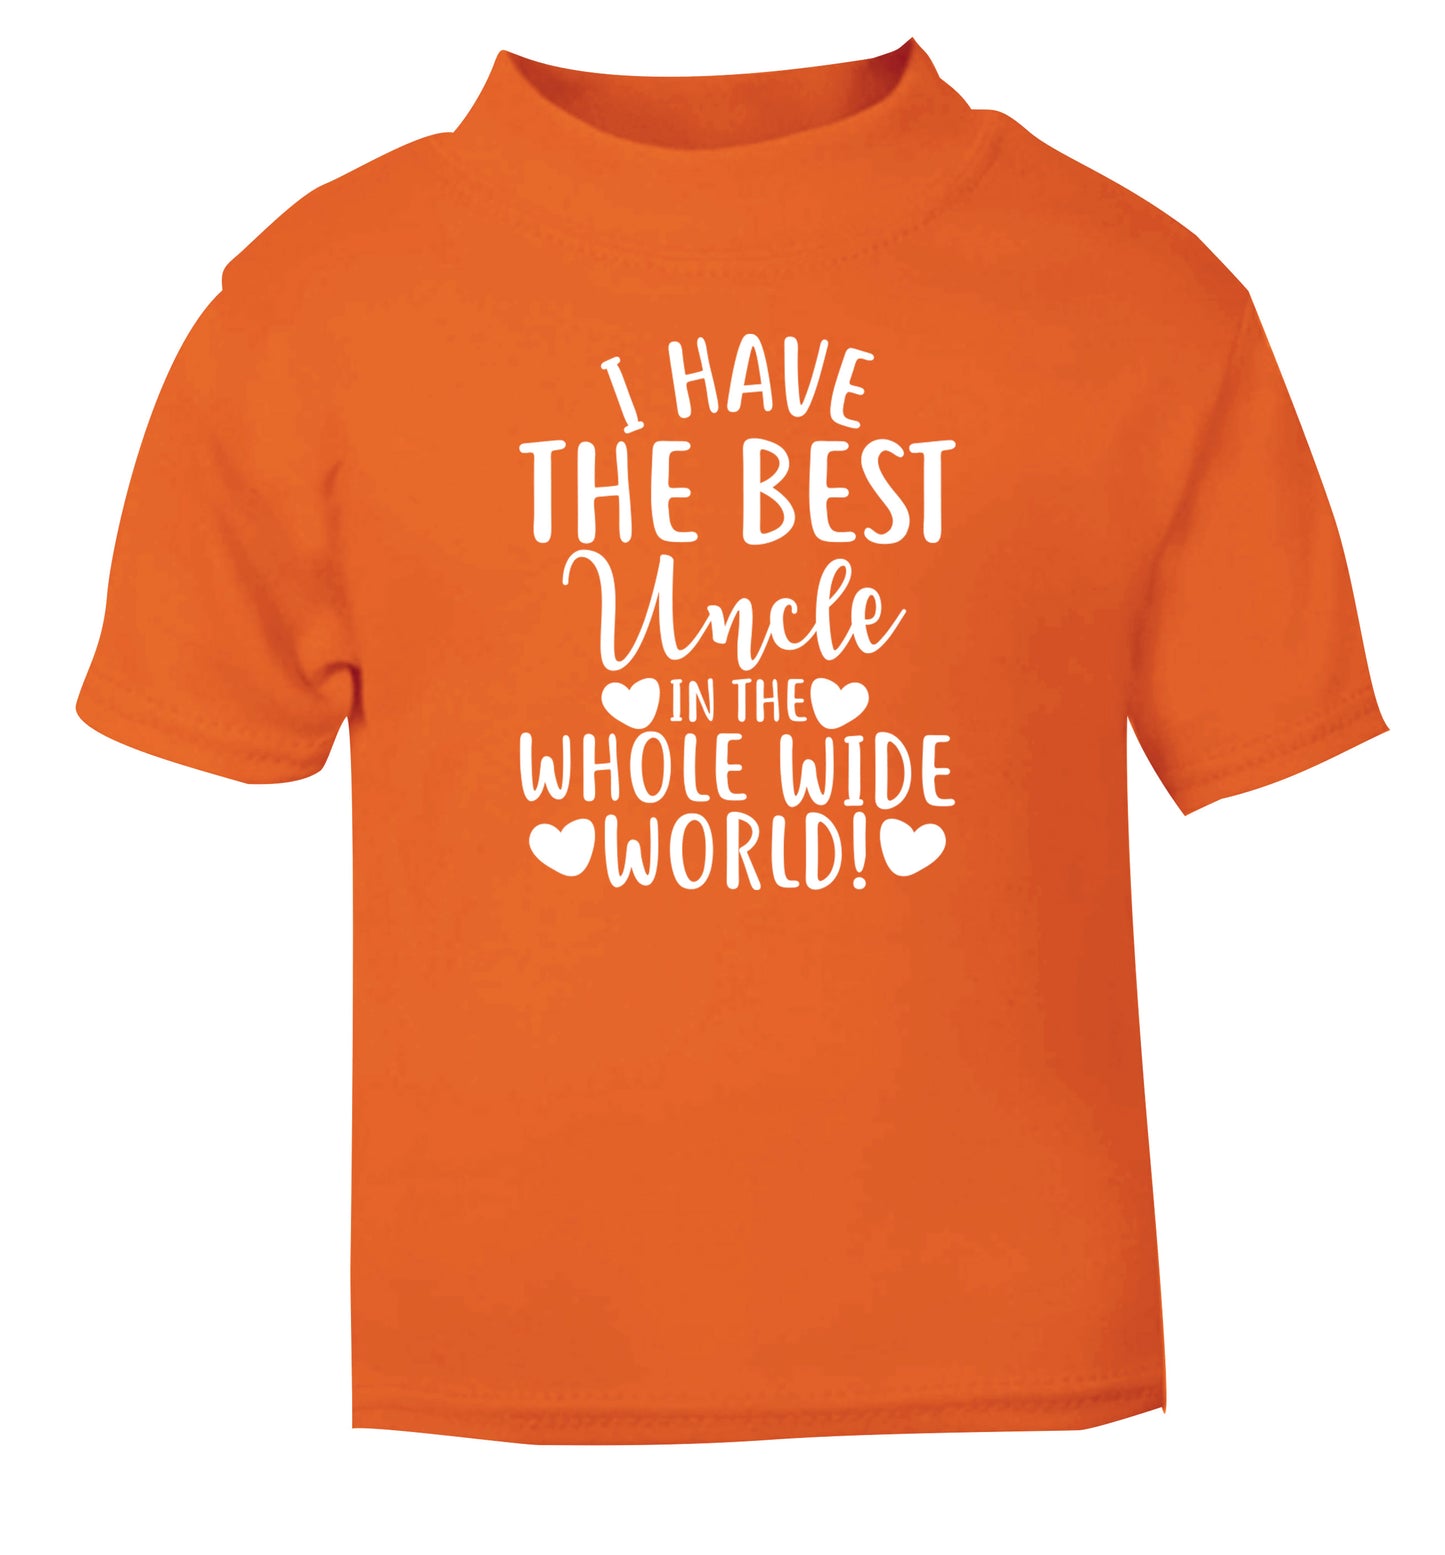 I have the best uncle in the whole wide world! orange Baby Toddler Tshirt 2 Years